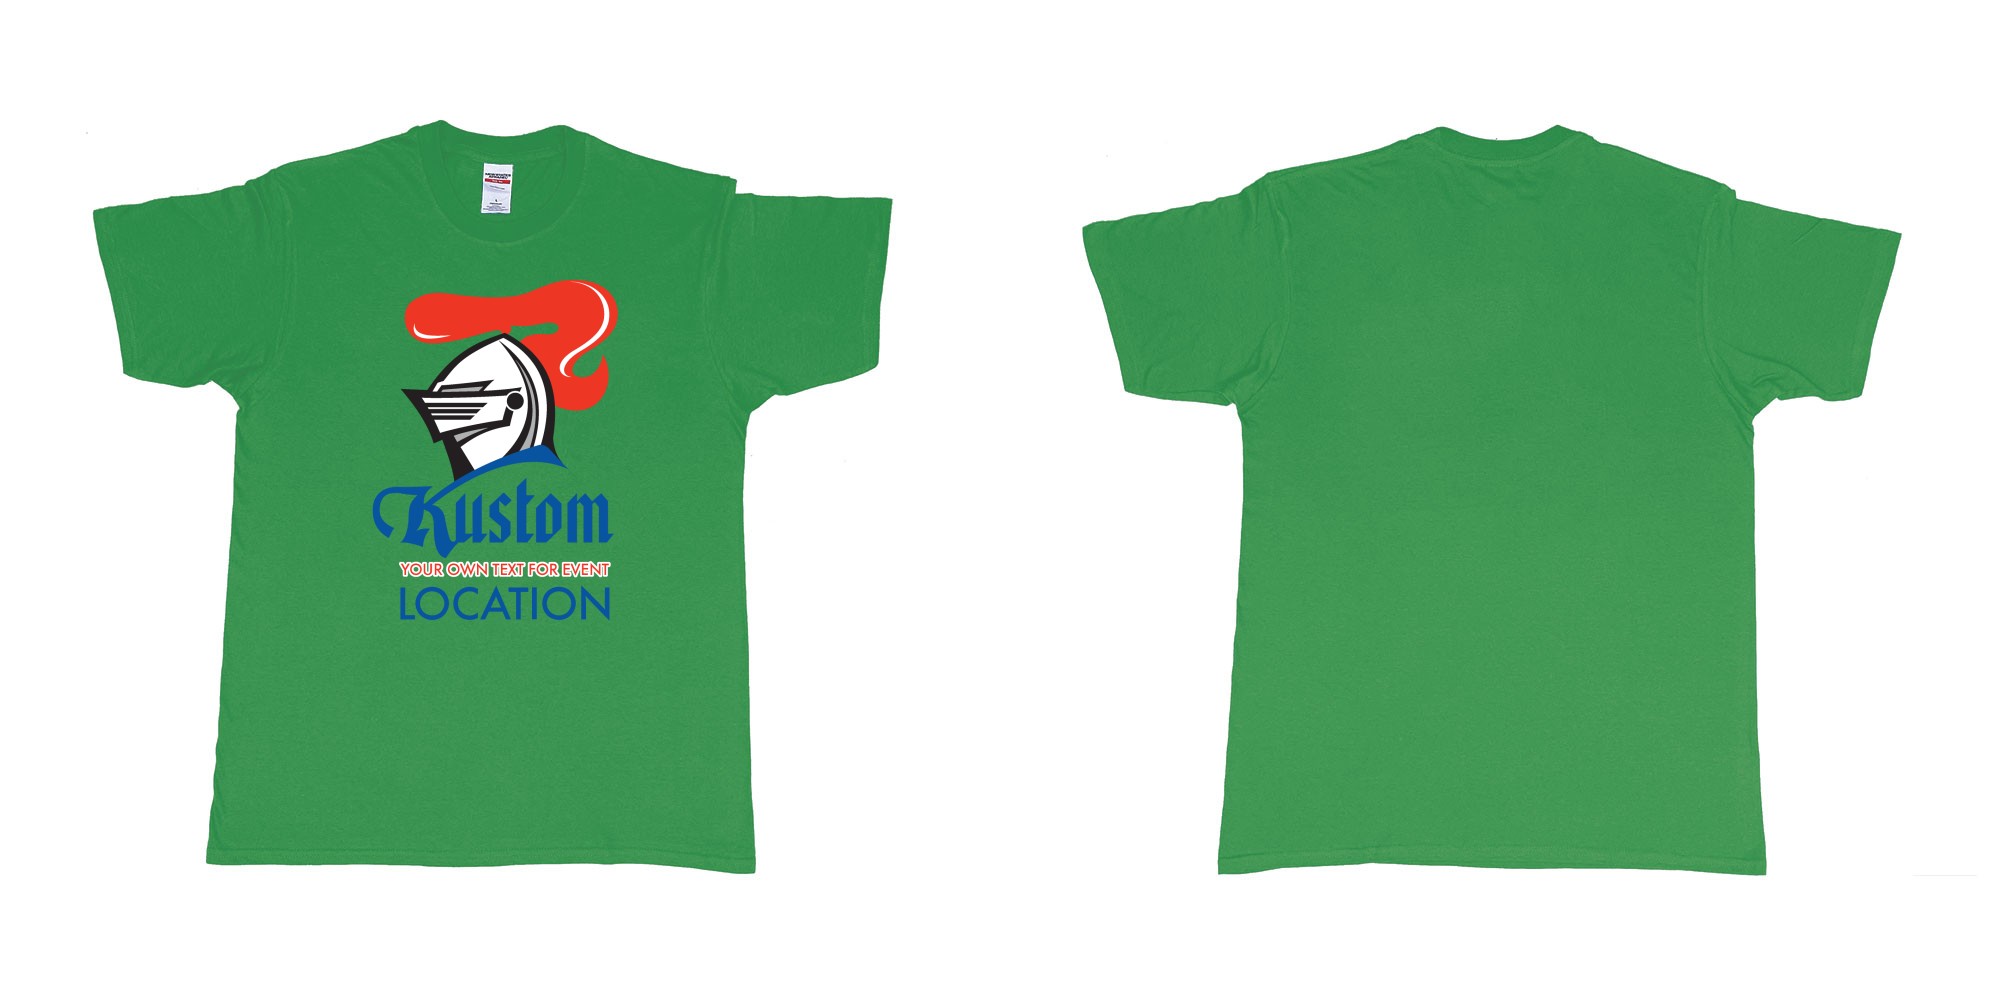 Custom tshirt design newcastle knights rugby league team custom event teeshirt in fabric color irish-green choice your own text made in Bali by The Pirate Way